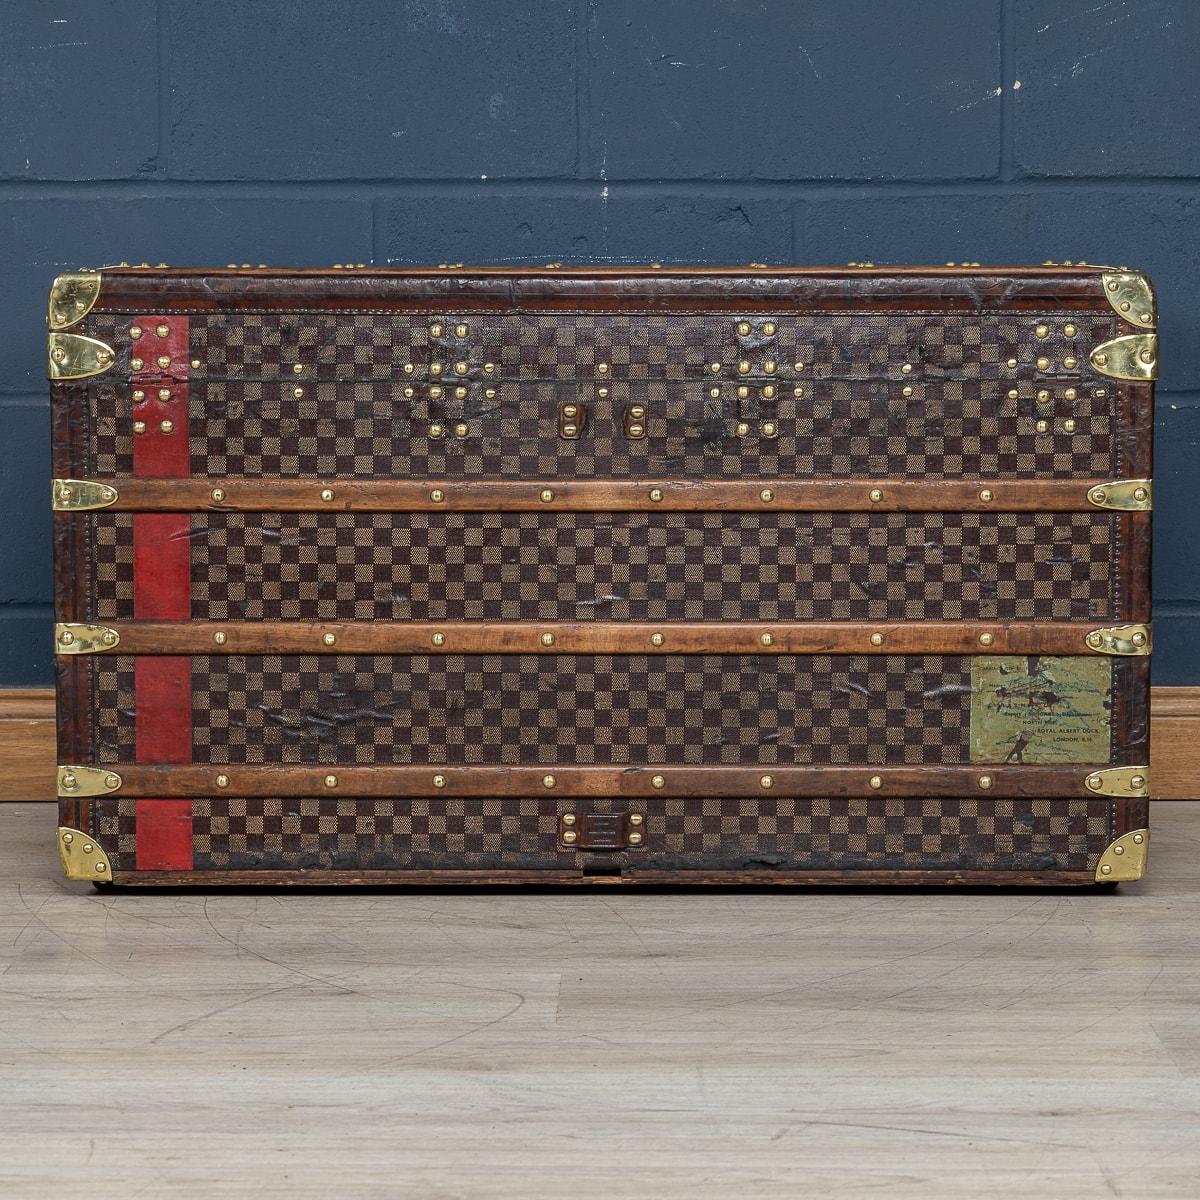 French Antique 20th Century Louis Vuitton Courier Trunk In Damier Canvas, France c.1900 For Sale